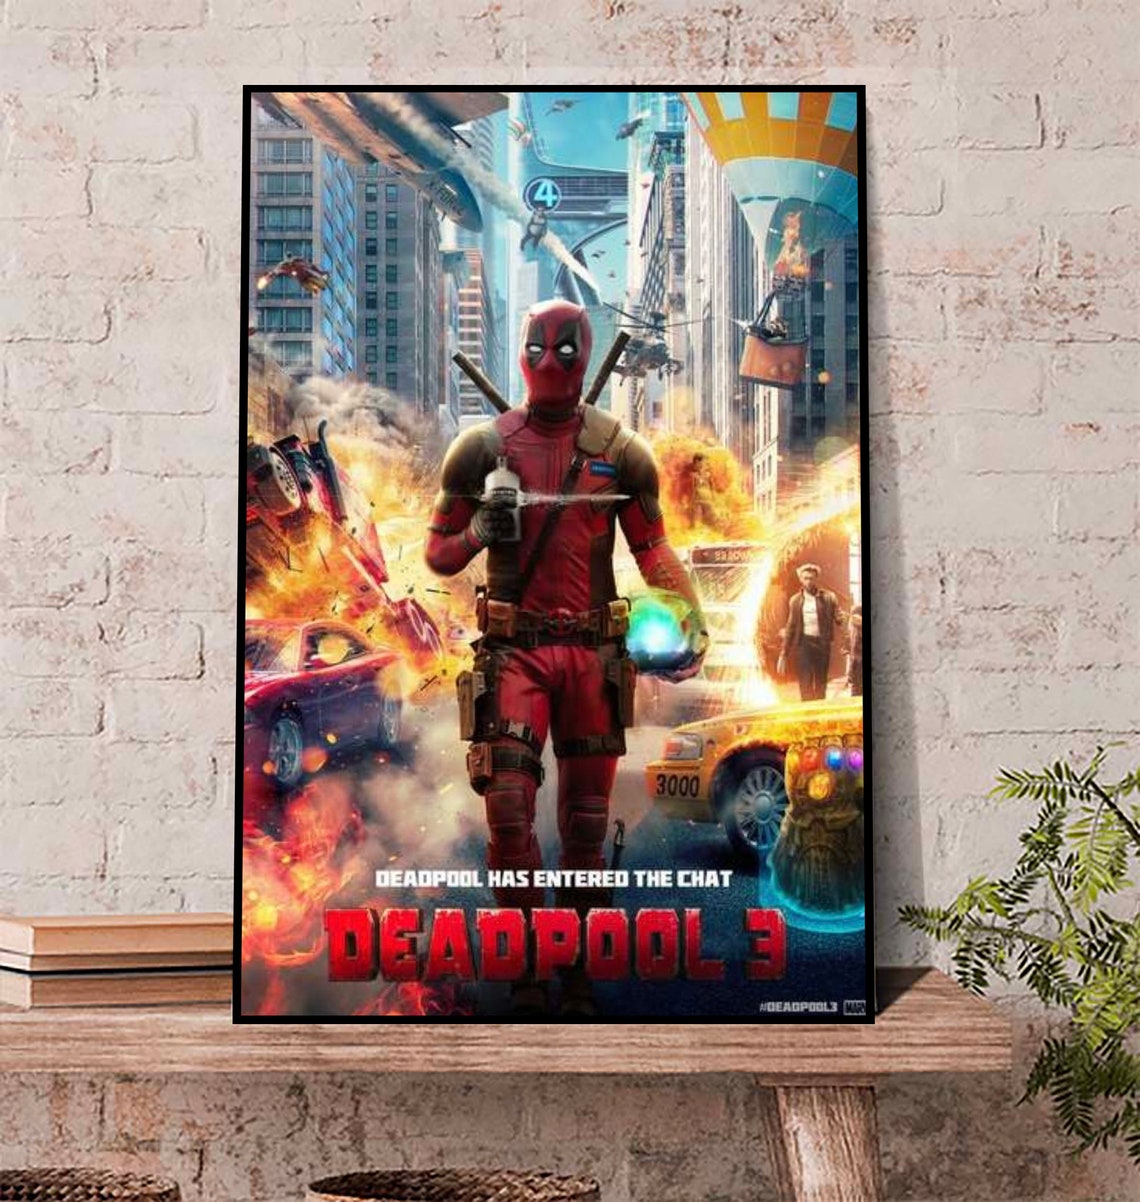 DeadPool 3 Poster, Deadpool has entered the chat Movie 2022 Poster Wall Art Print 